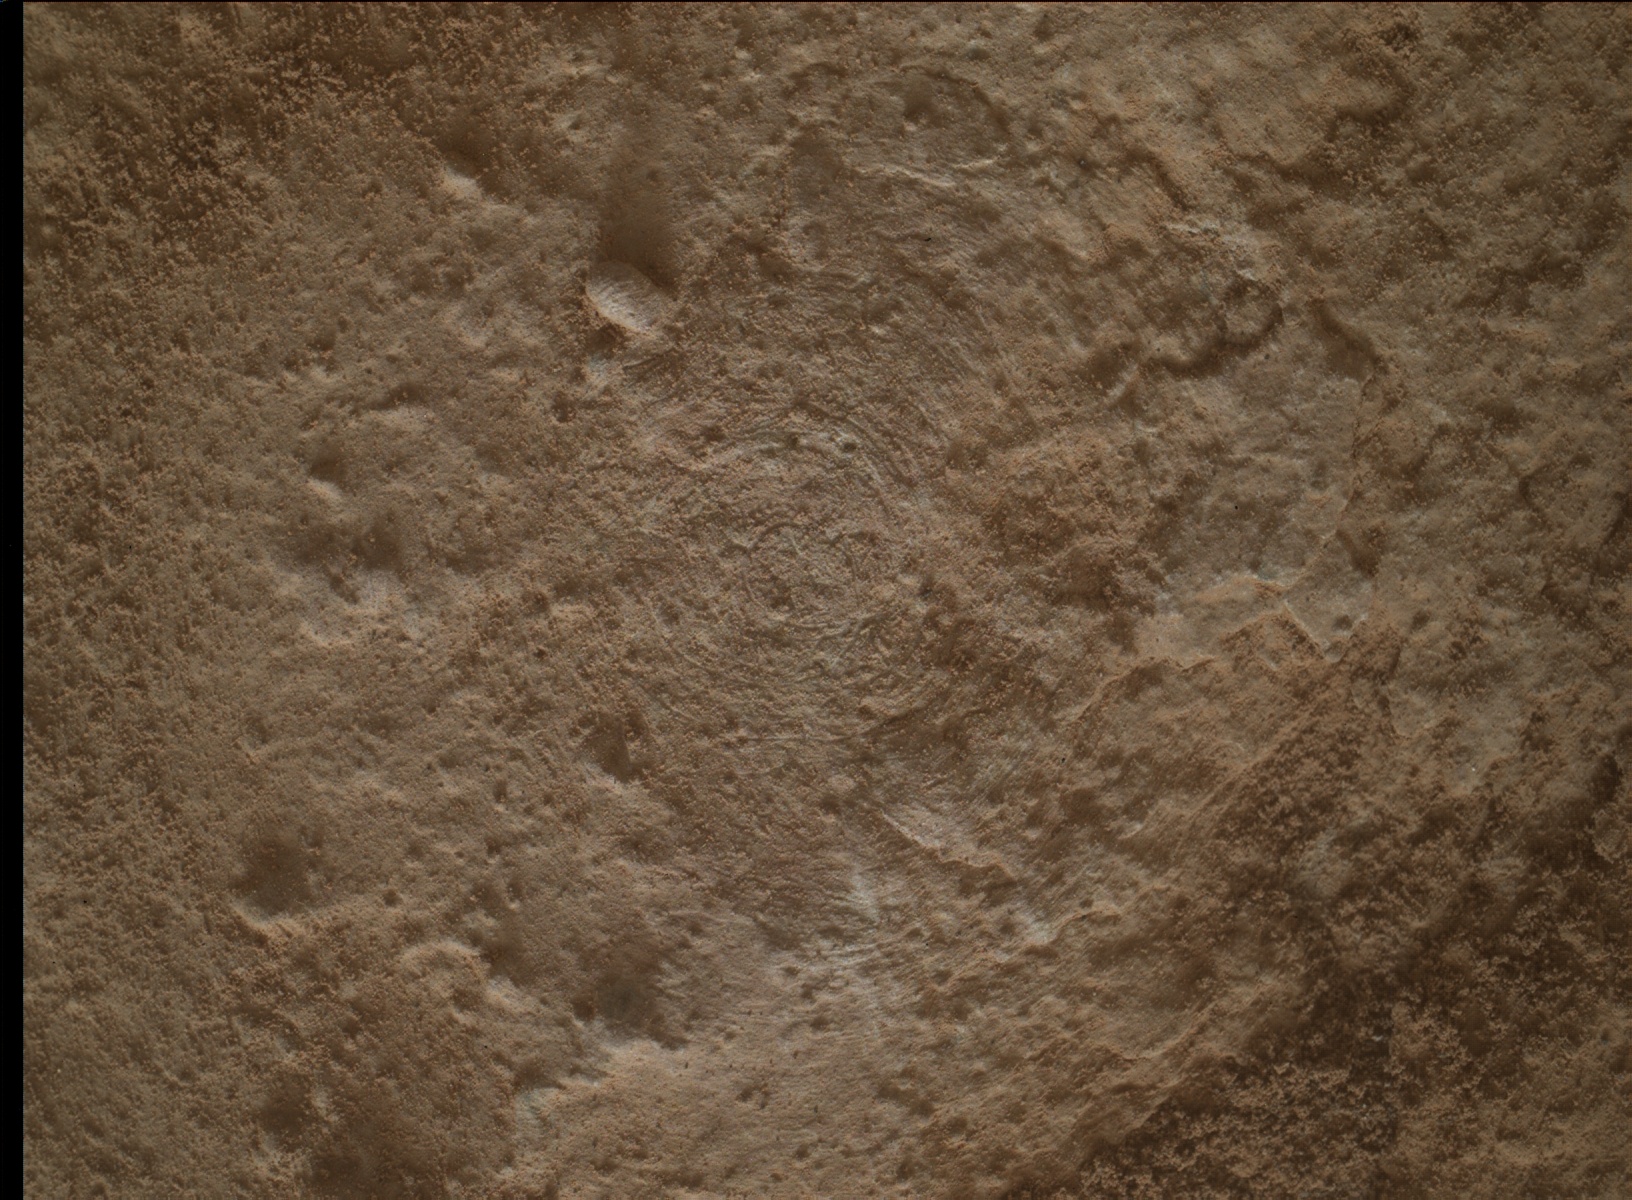 Nasa's Mars rover Curiosity acquired this image using its Mars Hand Lens Imager (MAHLI) on Sol 2801